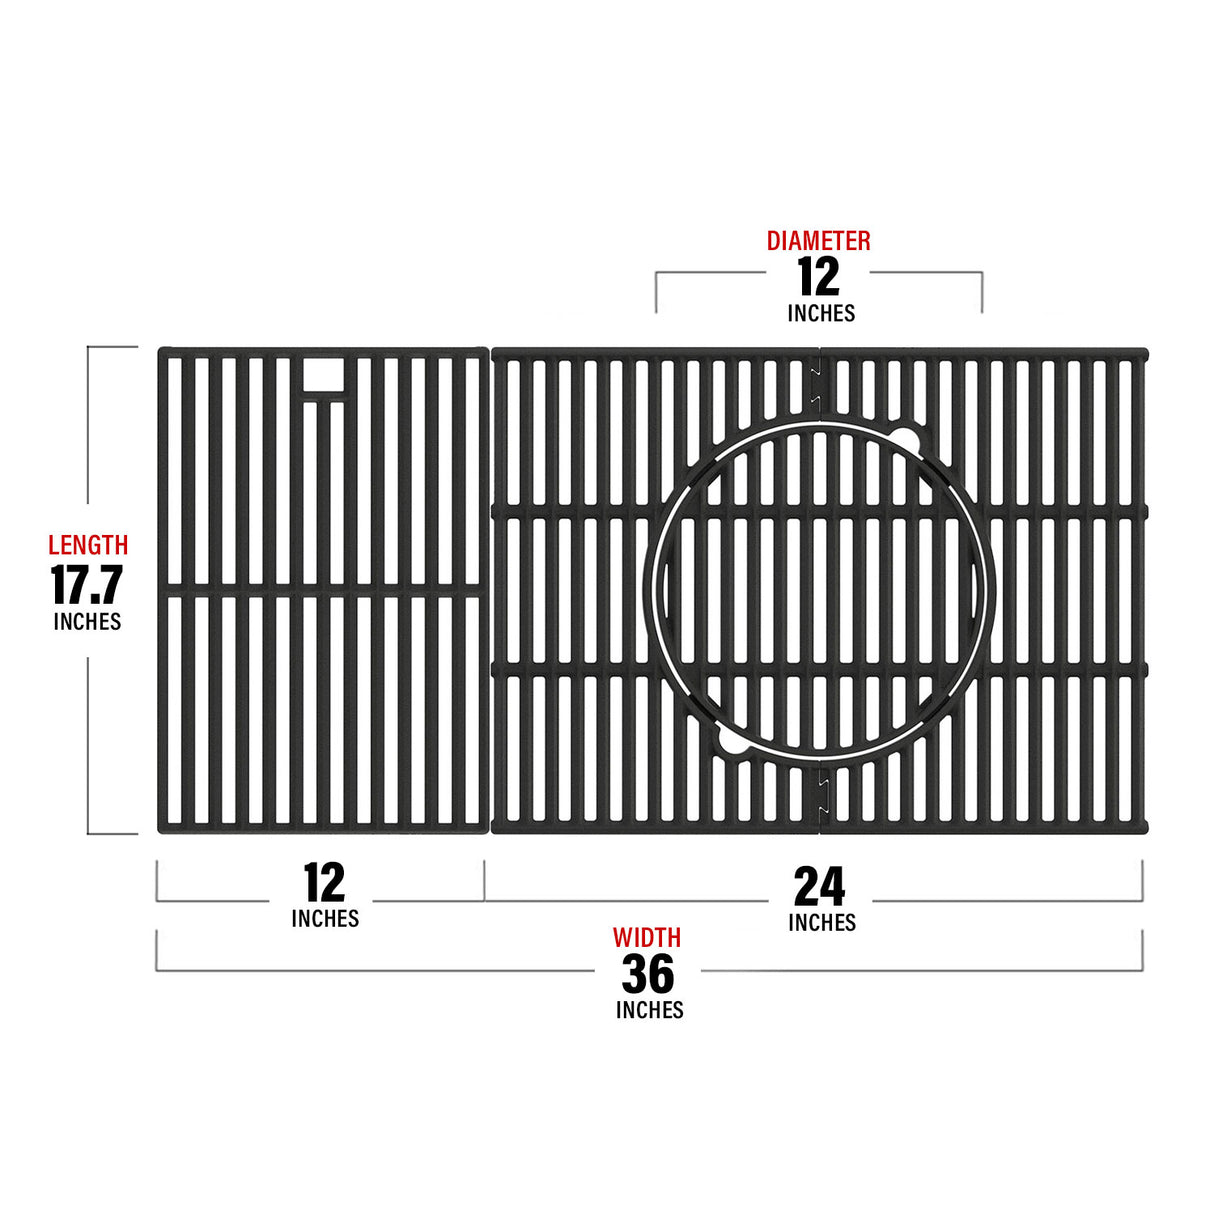 Multifunction Cast Iron Grill Grate for 6-Burner Grill (77352 / 77352MB / Denali 605)